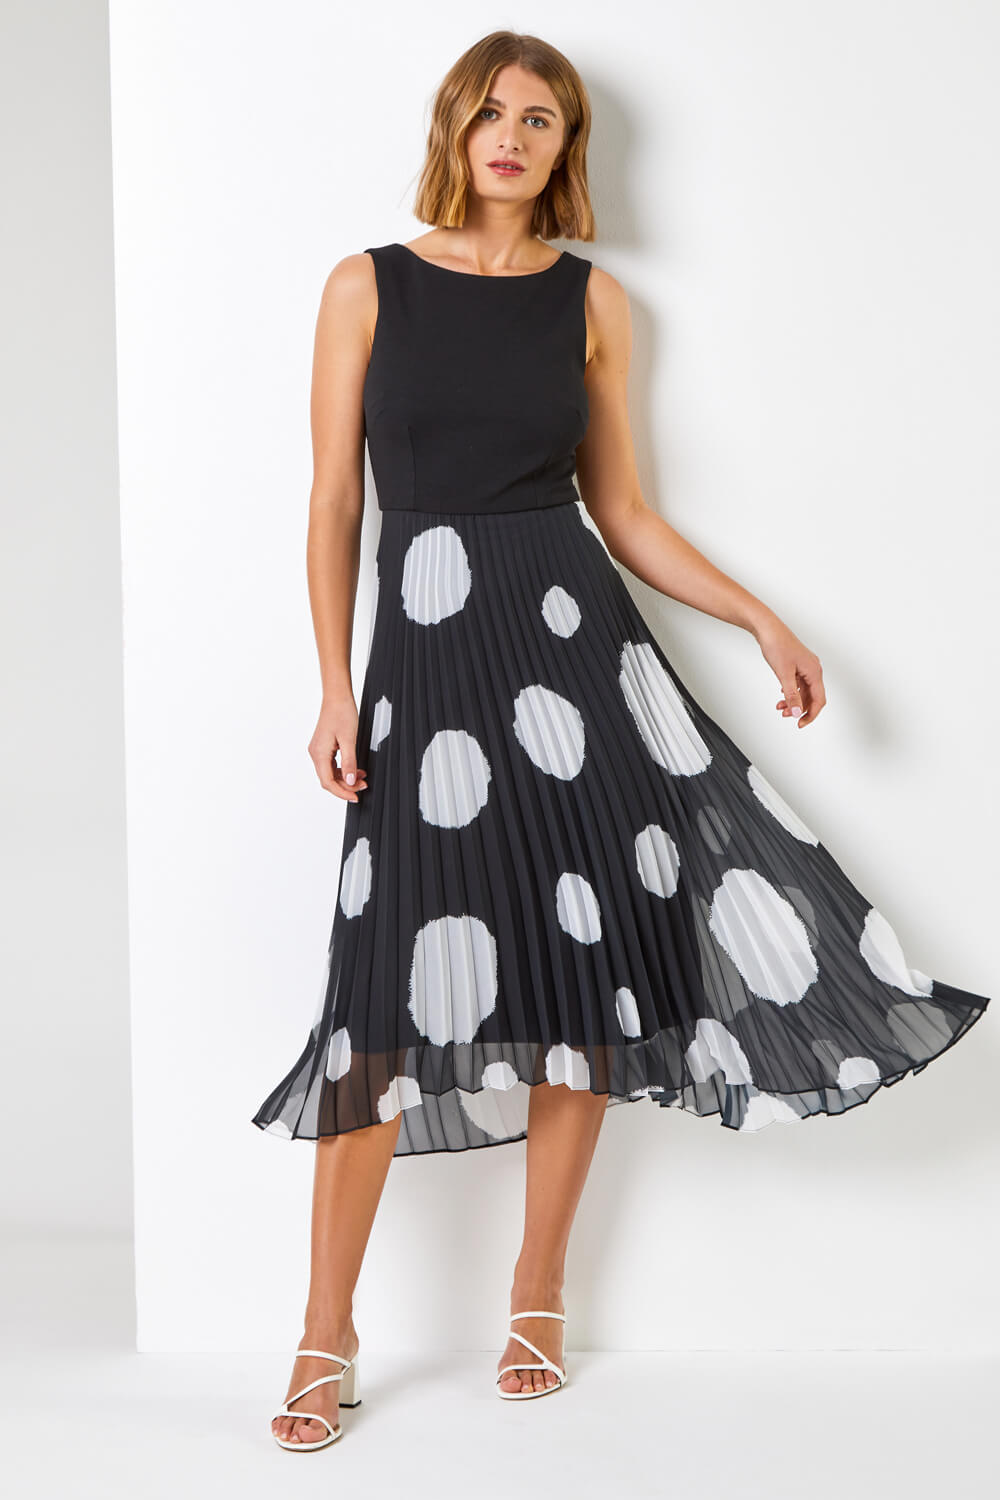 Review Black And White Polka Dot Dress Fit & Flare Fully Lined